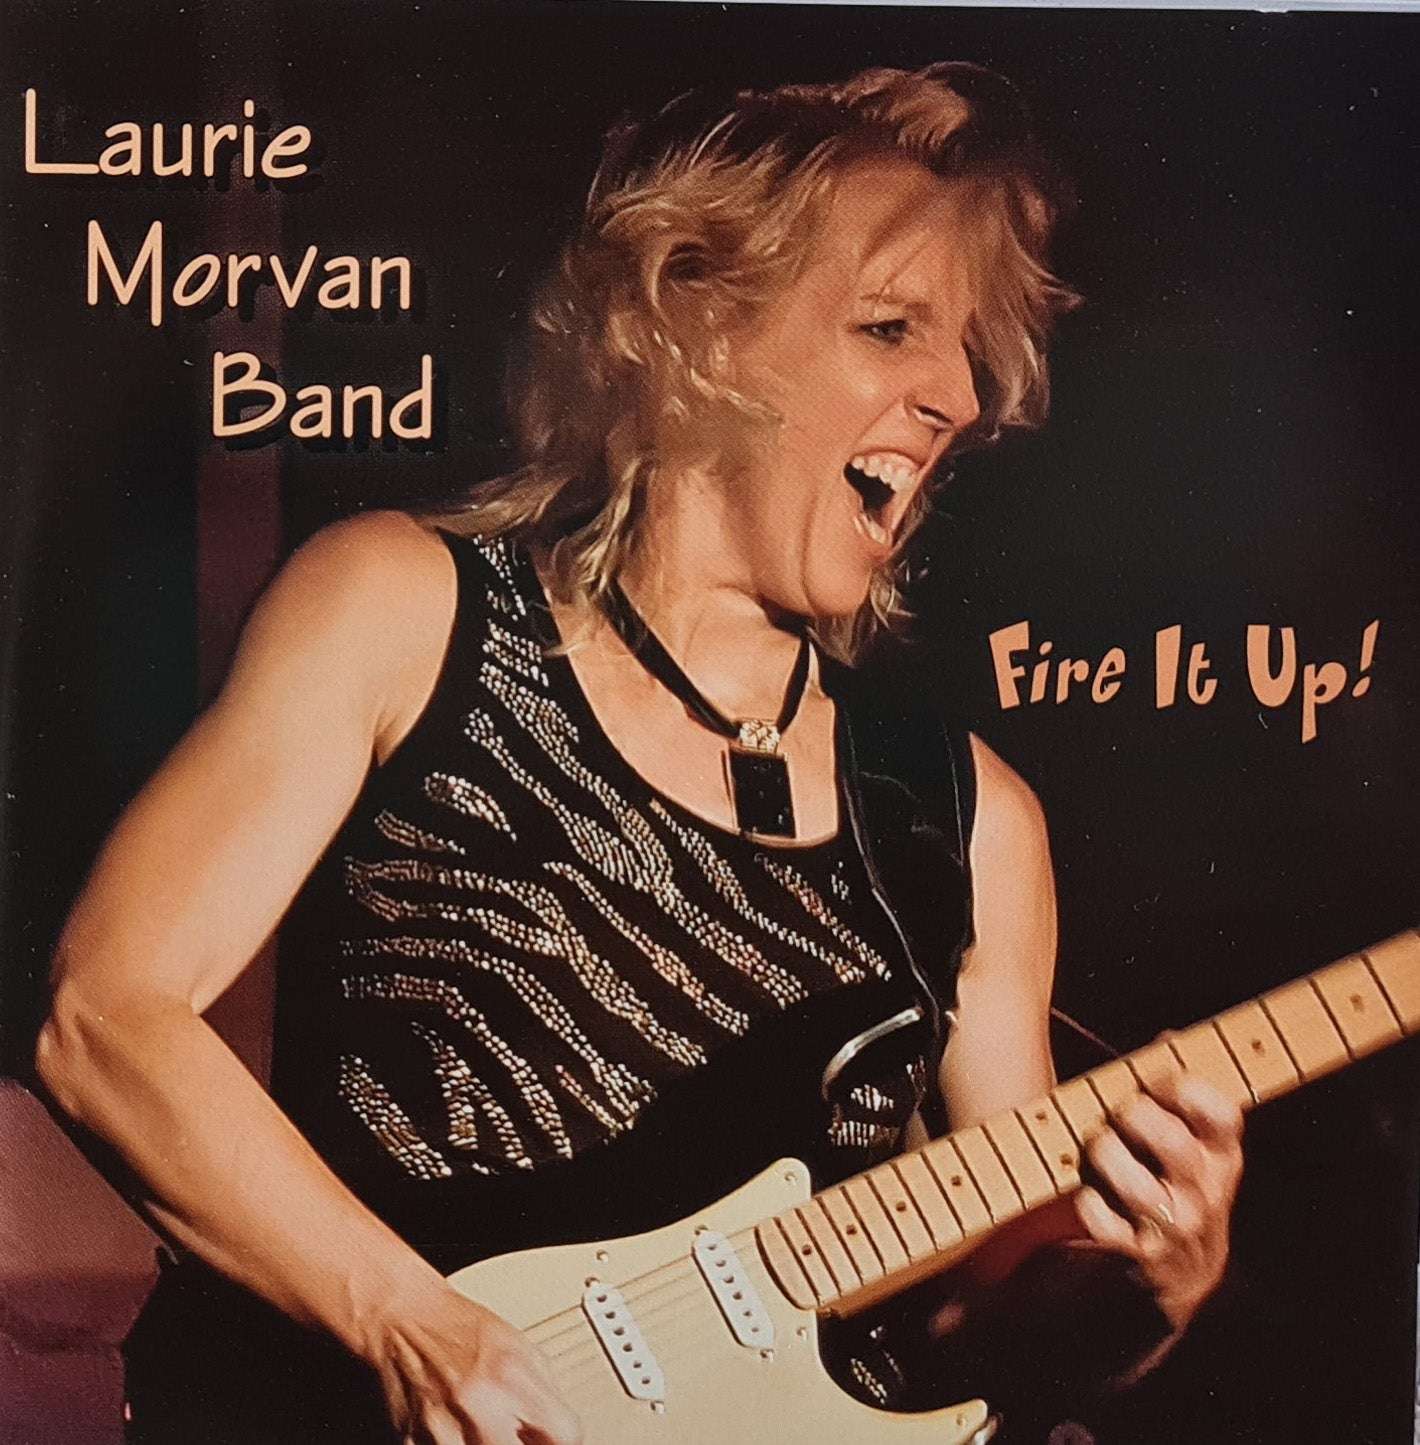 Laurie Morvan Band - Fire It Up! (CD)